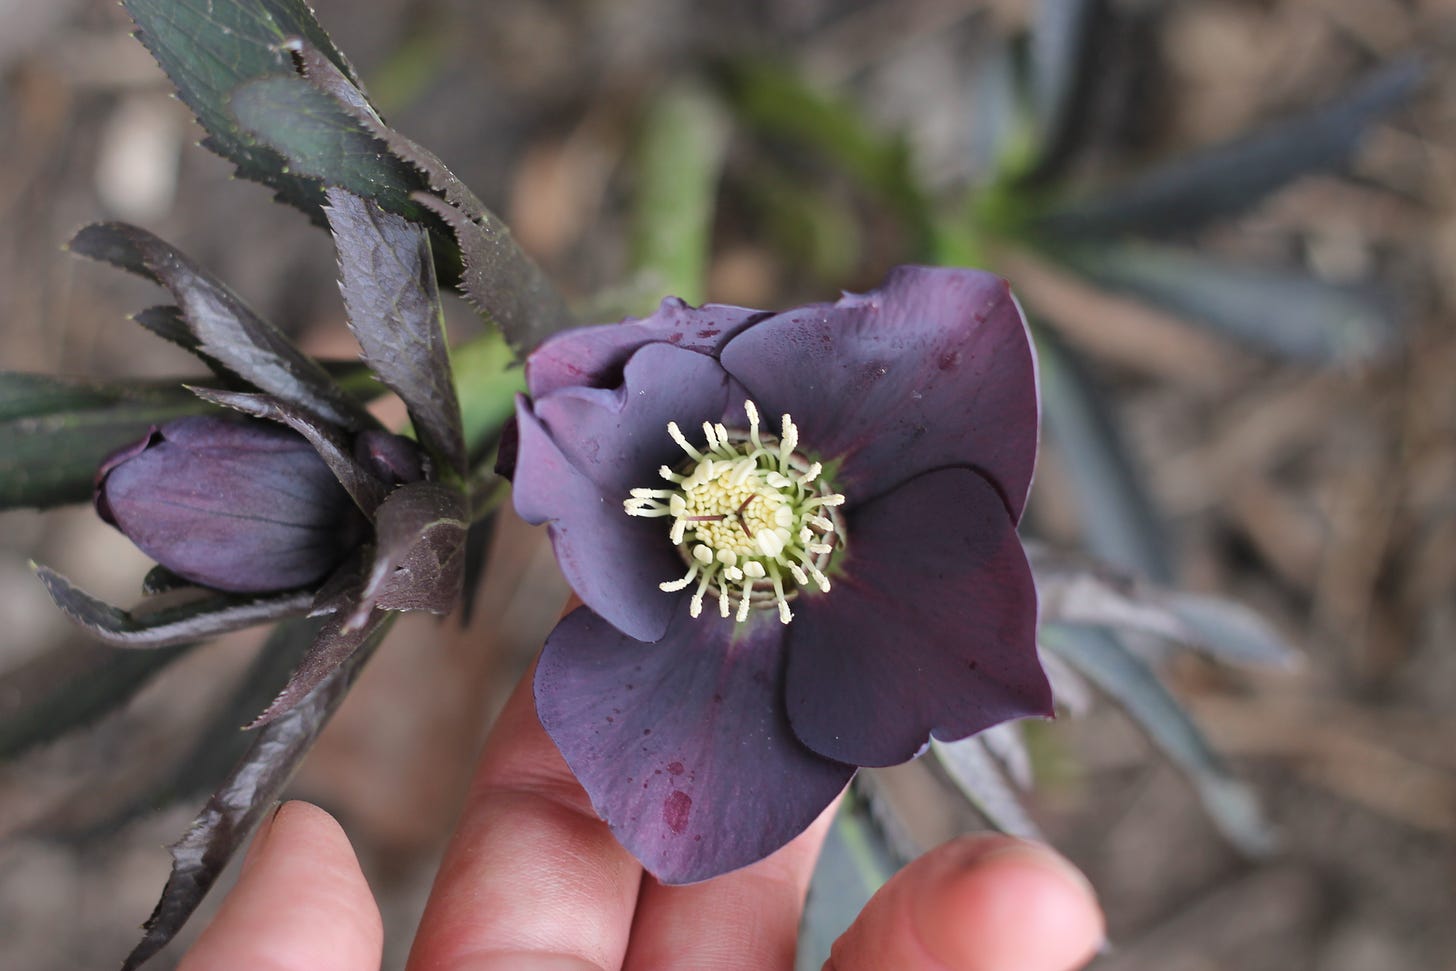 A hand holds up a dark purple flower head with six petals and dark leaves